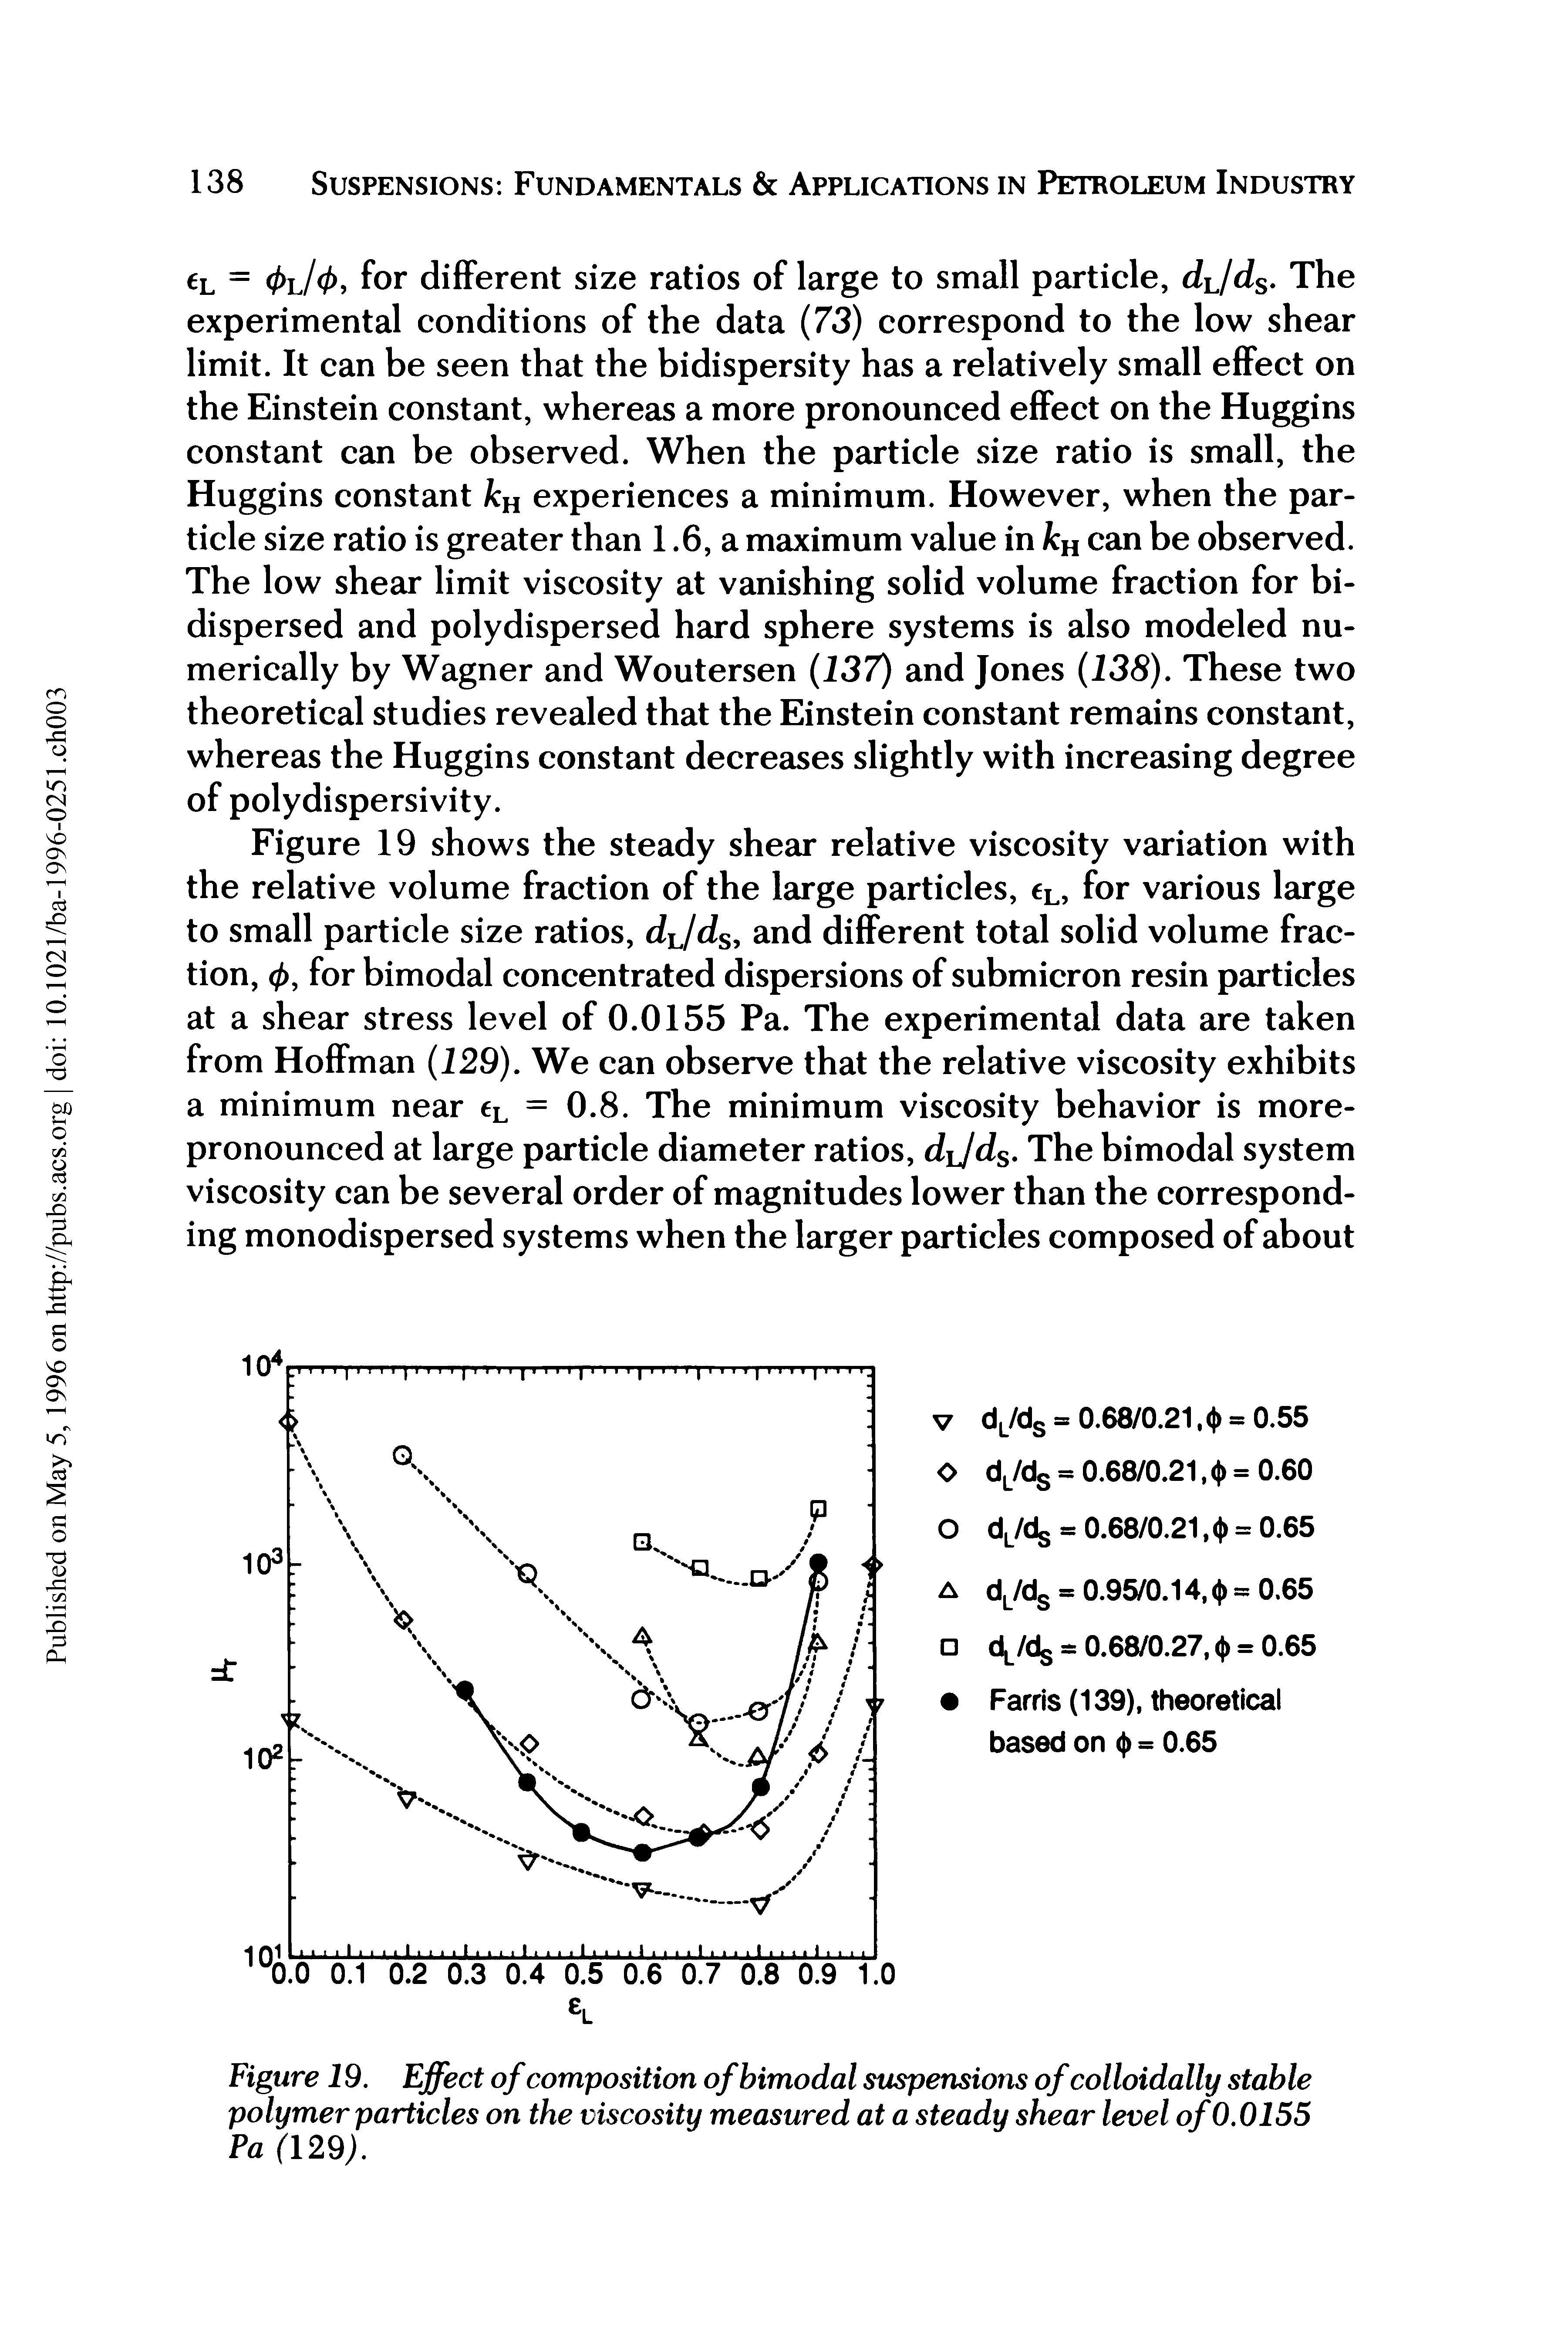 Figure 19. Effect of composition of bimodal suspensions of colloidally stable polymer particles on the viscosity measured at a steady shear level of 0.0155 Pa (129).